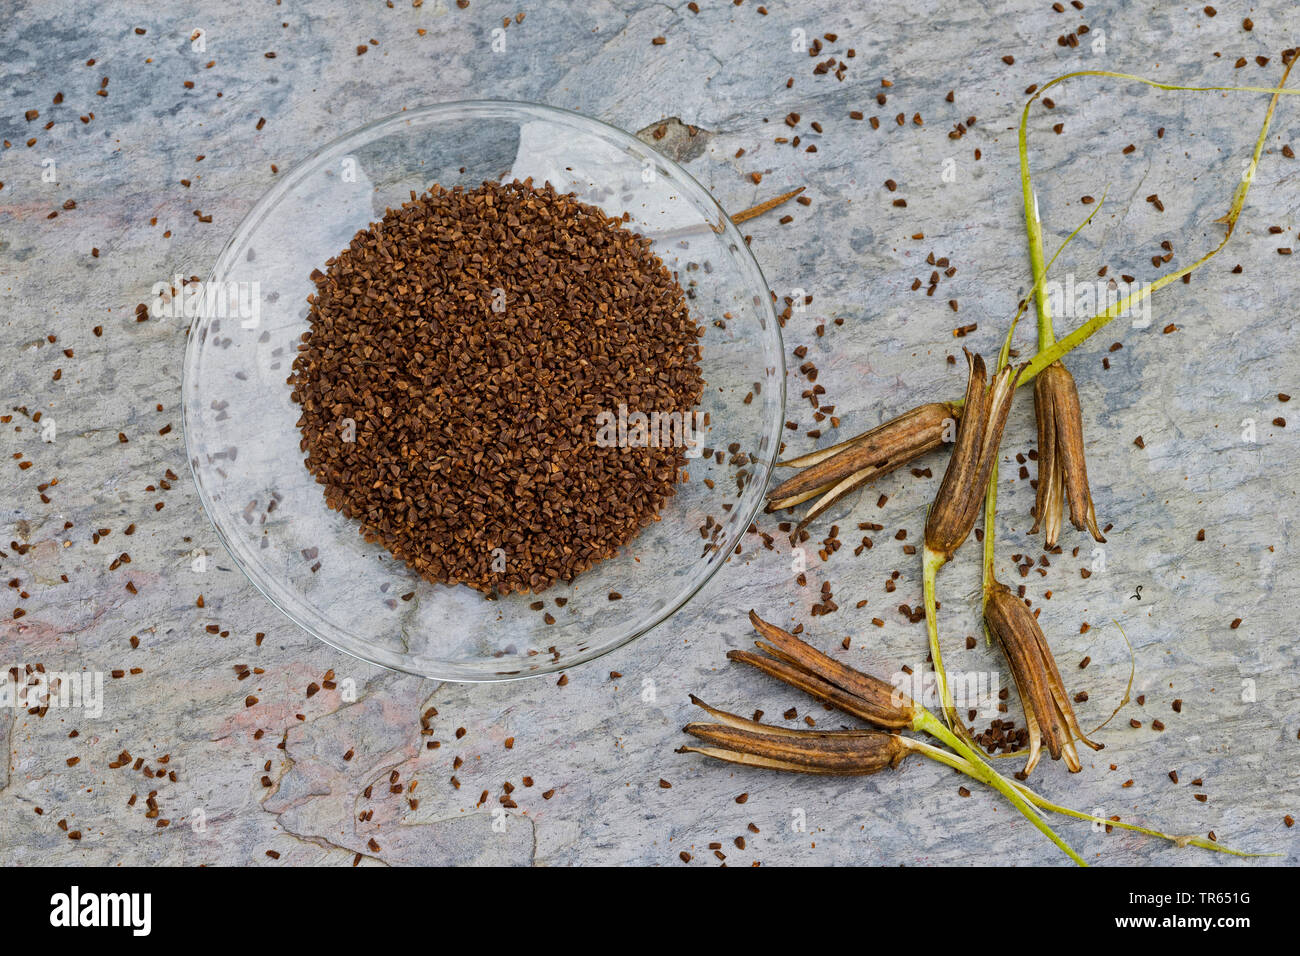 common evening primrose (Oenothera biennis), seed in a bowl, production of a evening primrose oil, Germany Stock Photo